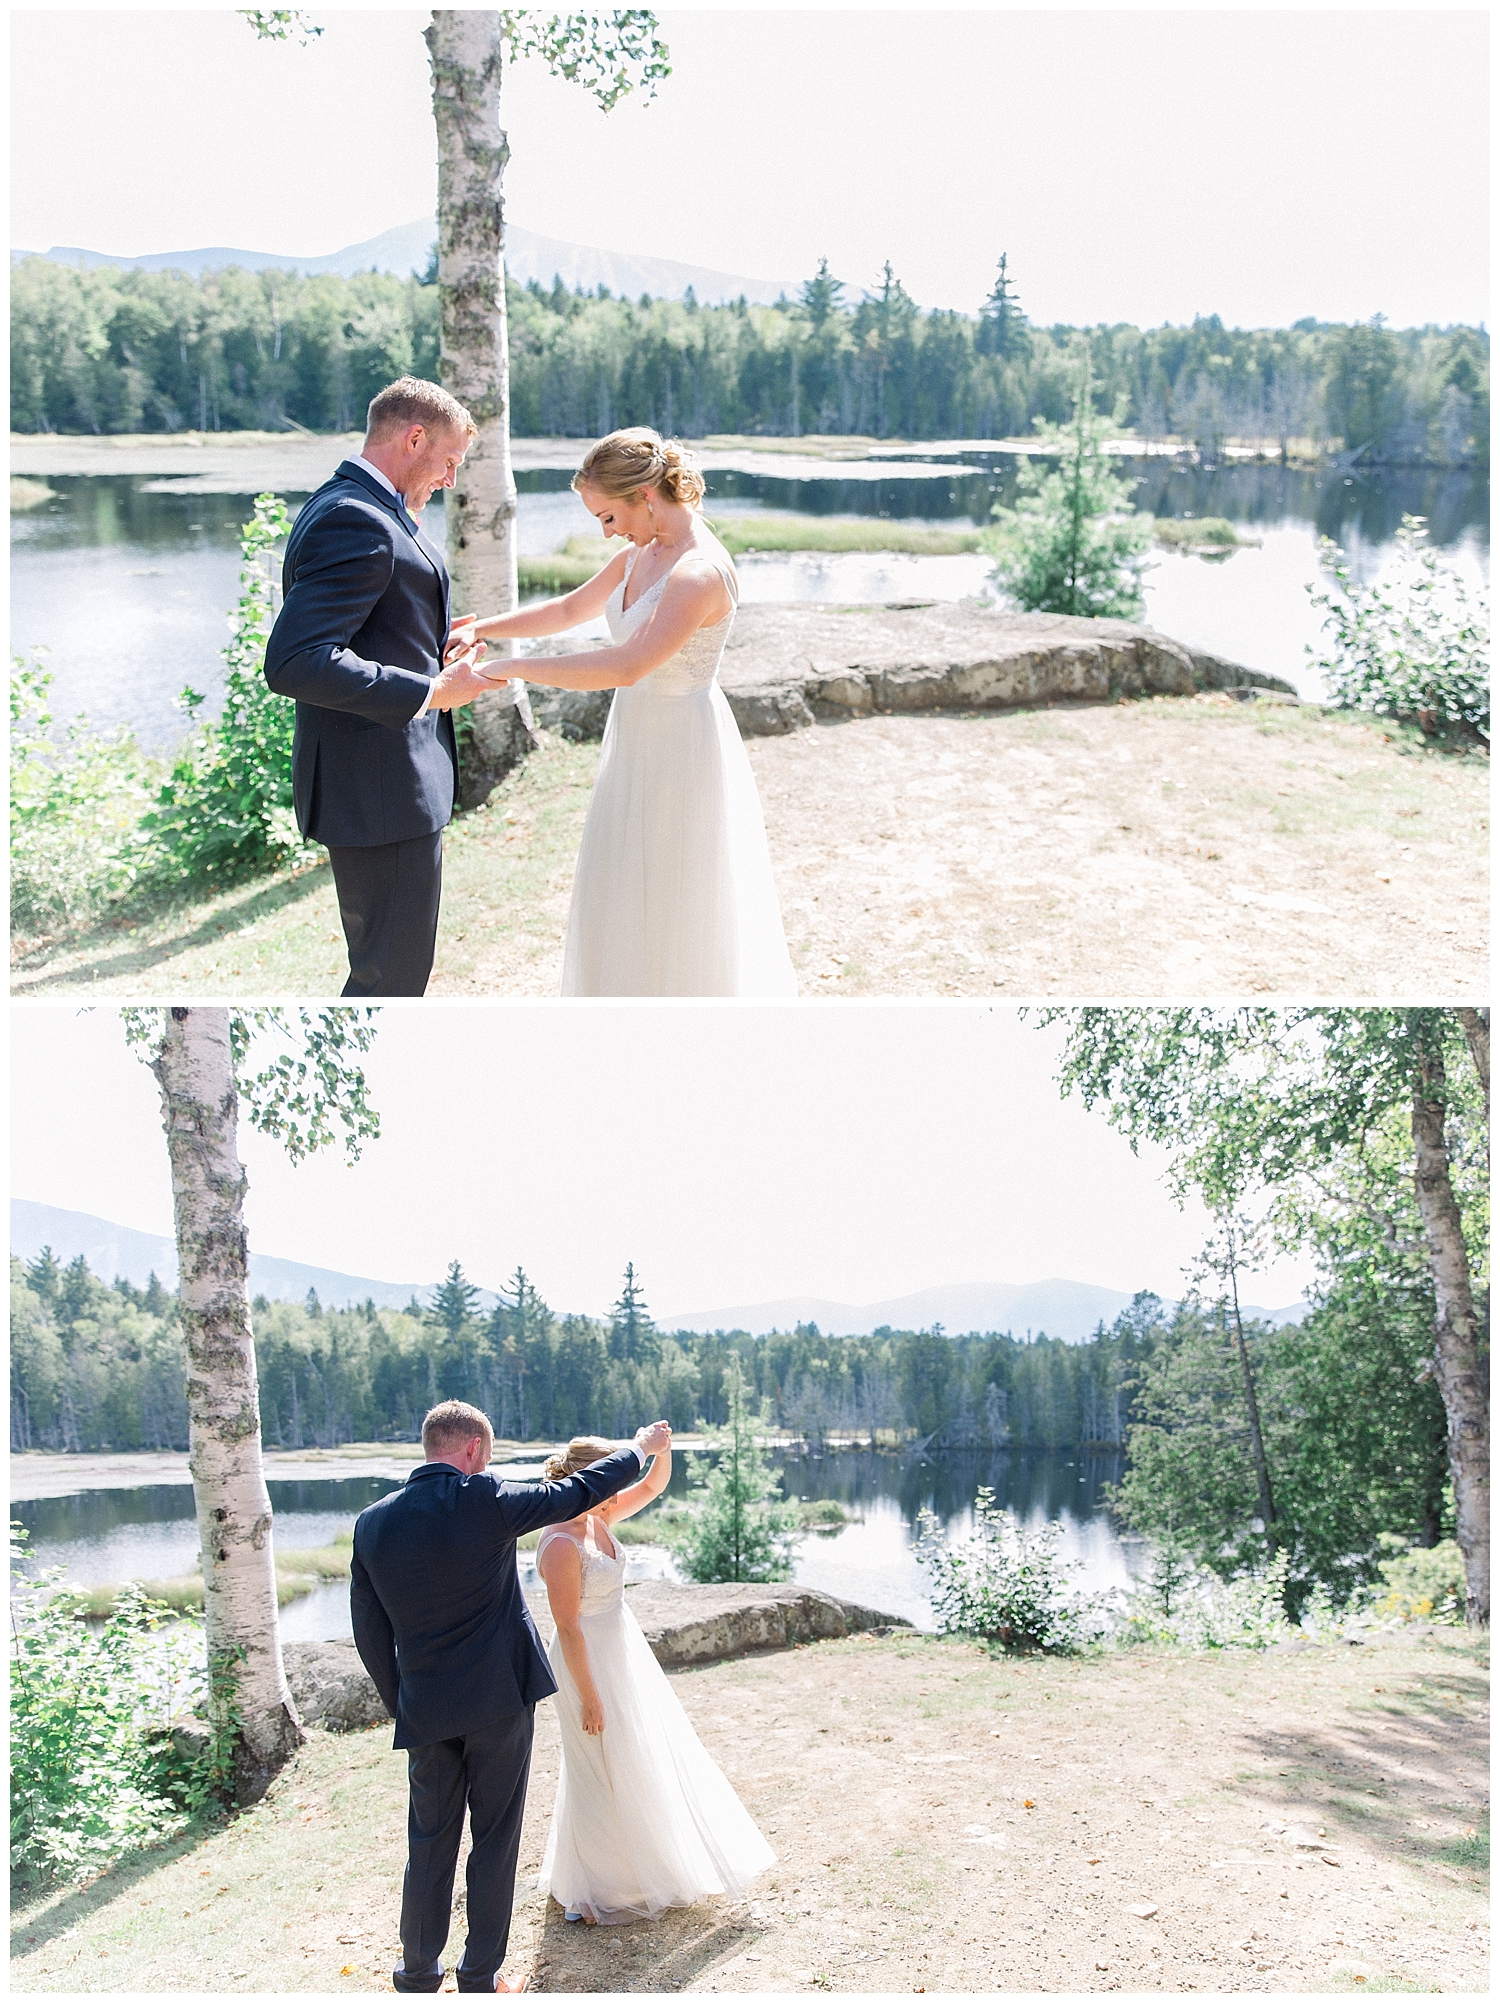 Bride and Groom Portraits after their First Look at a Sugarloaf Mountain Resort Wedding in Maine, photos by Halie Olszowy.